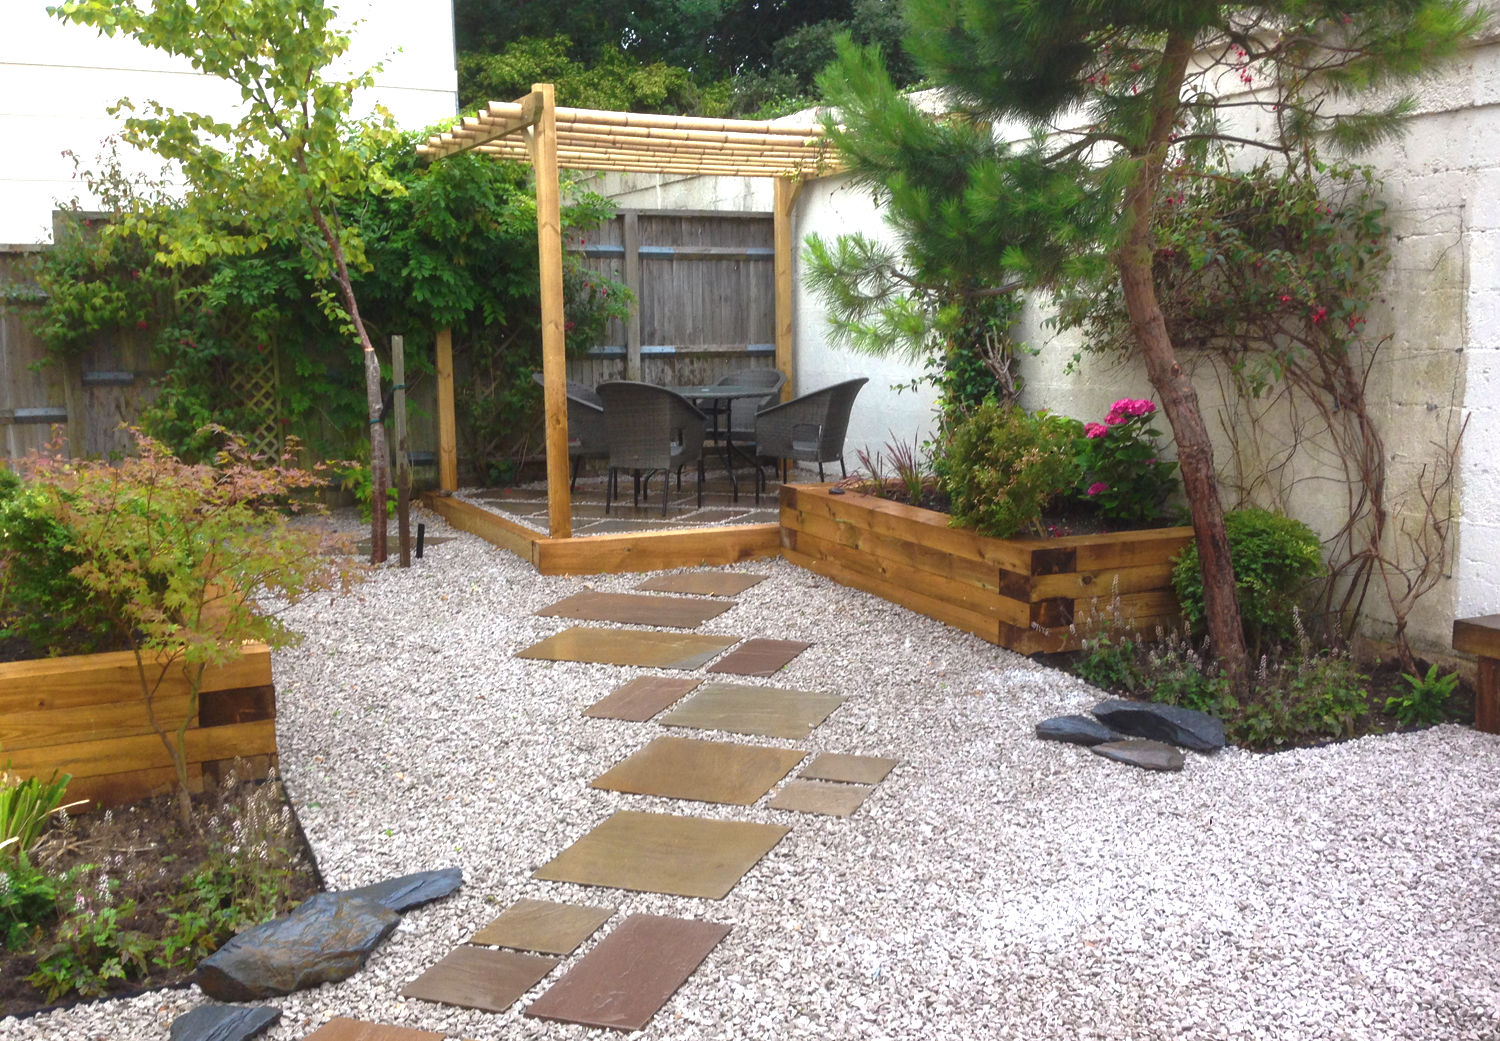 Courtyard garden in Brighton, with Japanese influences. Stones and rock lead to a raised patio with a bamboo pergola.